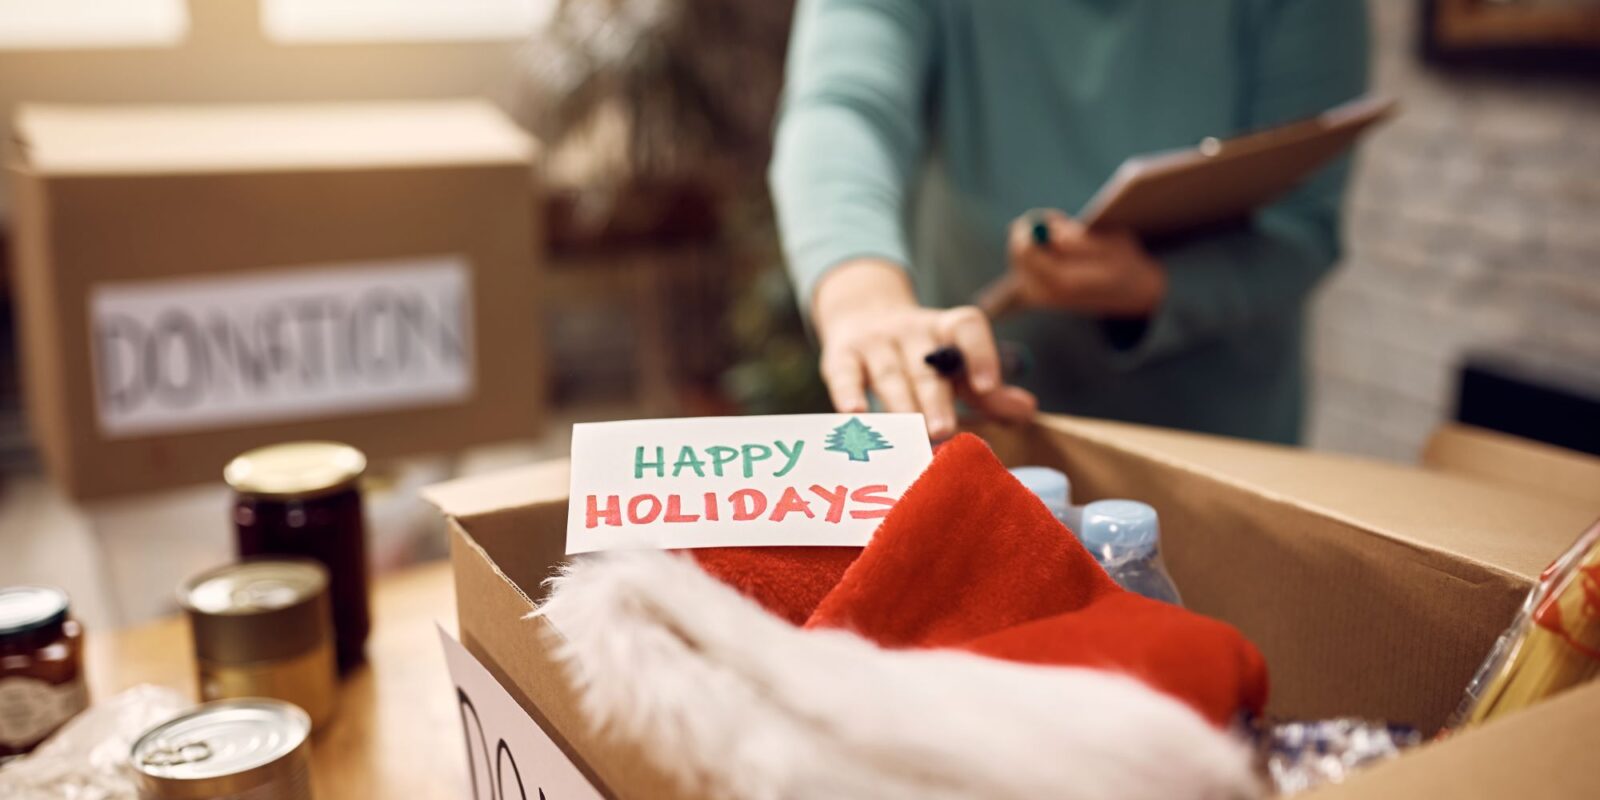 Close-up of woman preparing donation boxes during post holiday decluttering